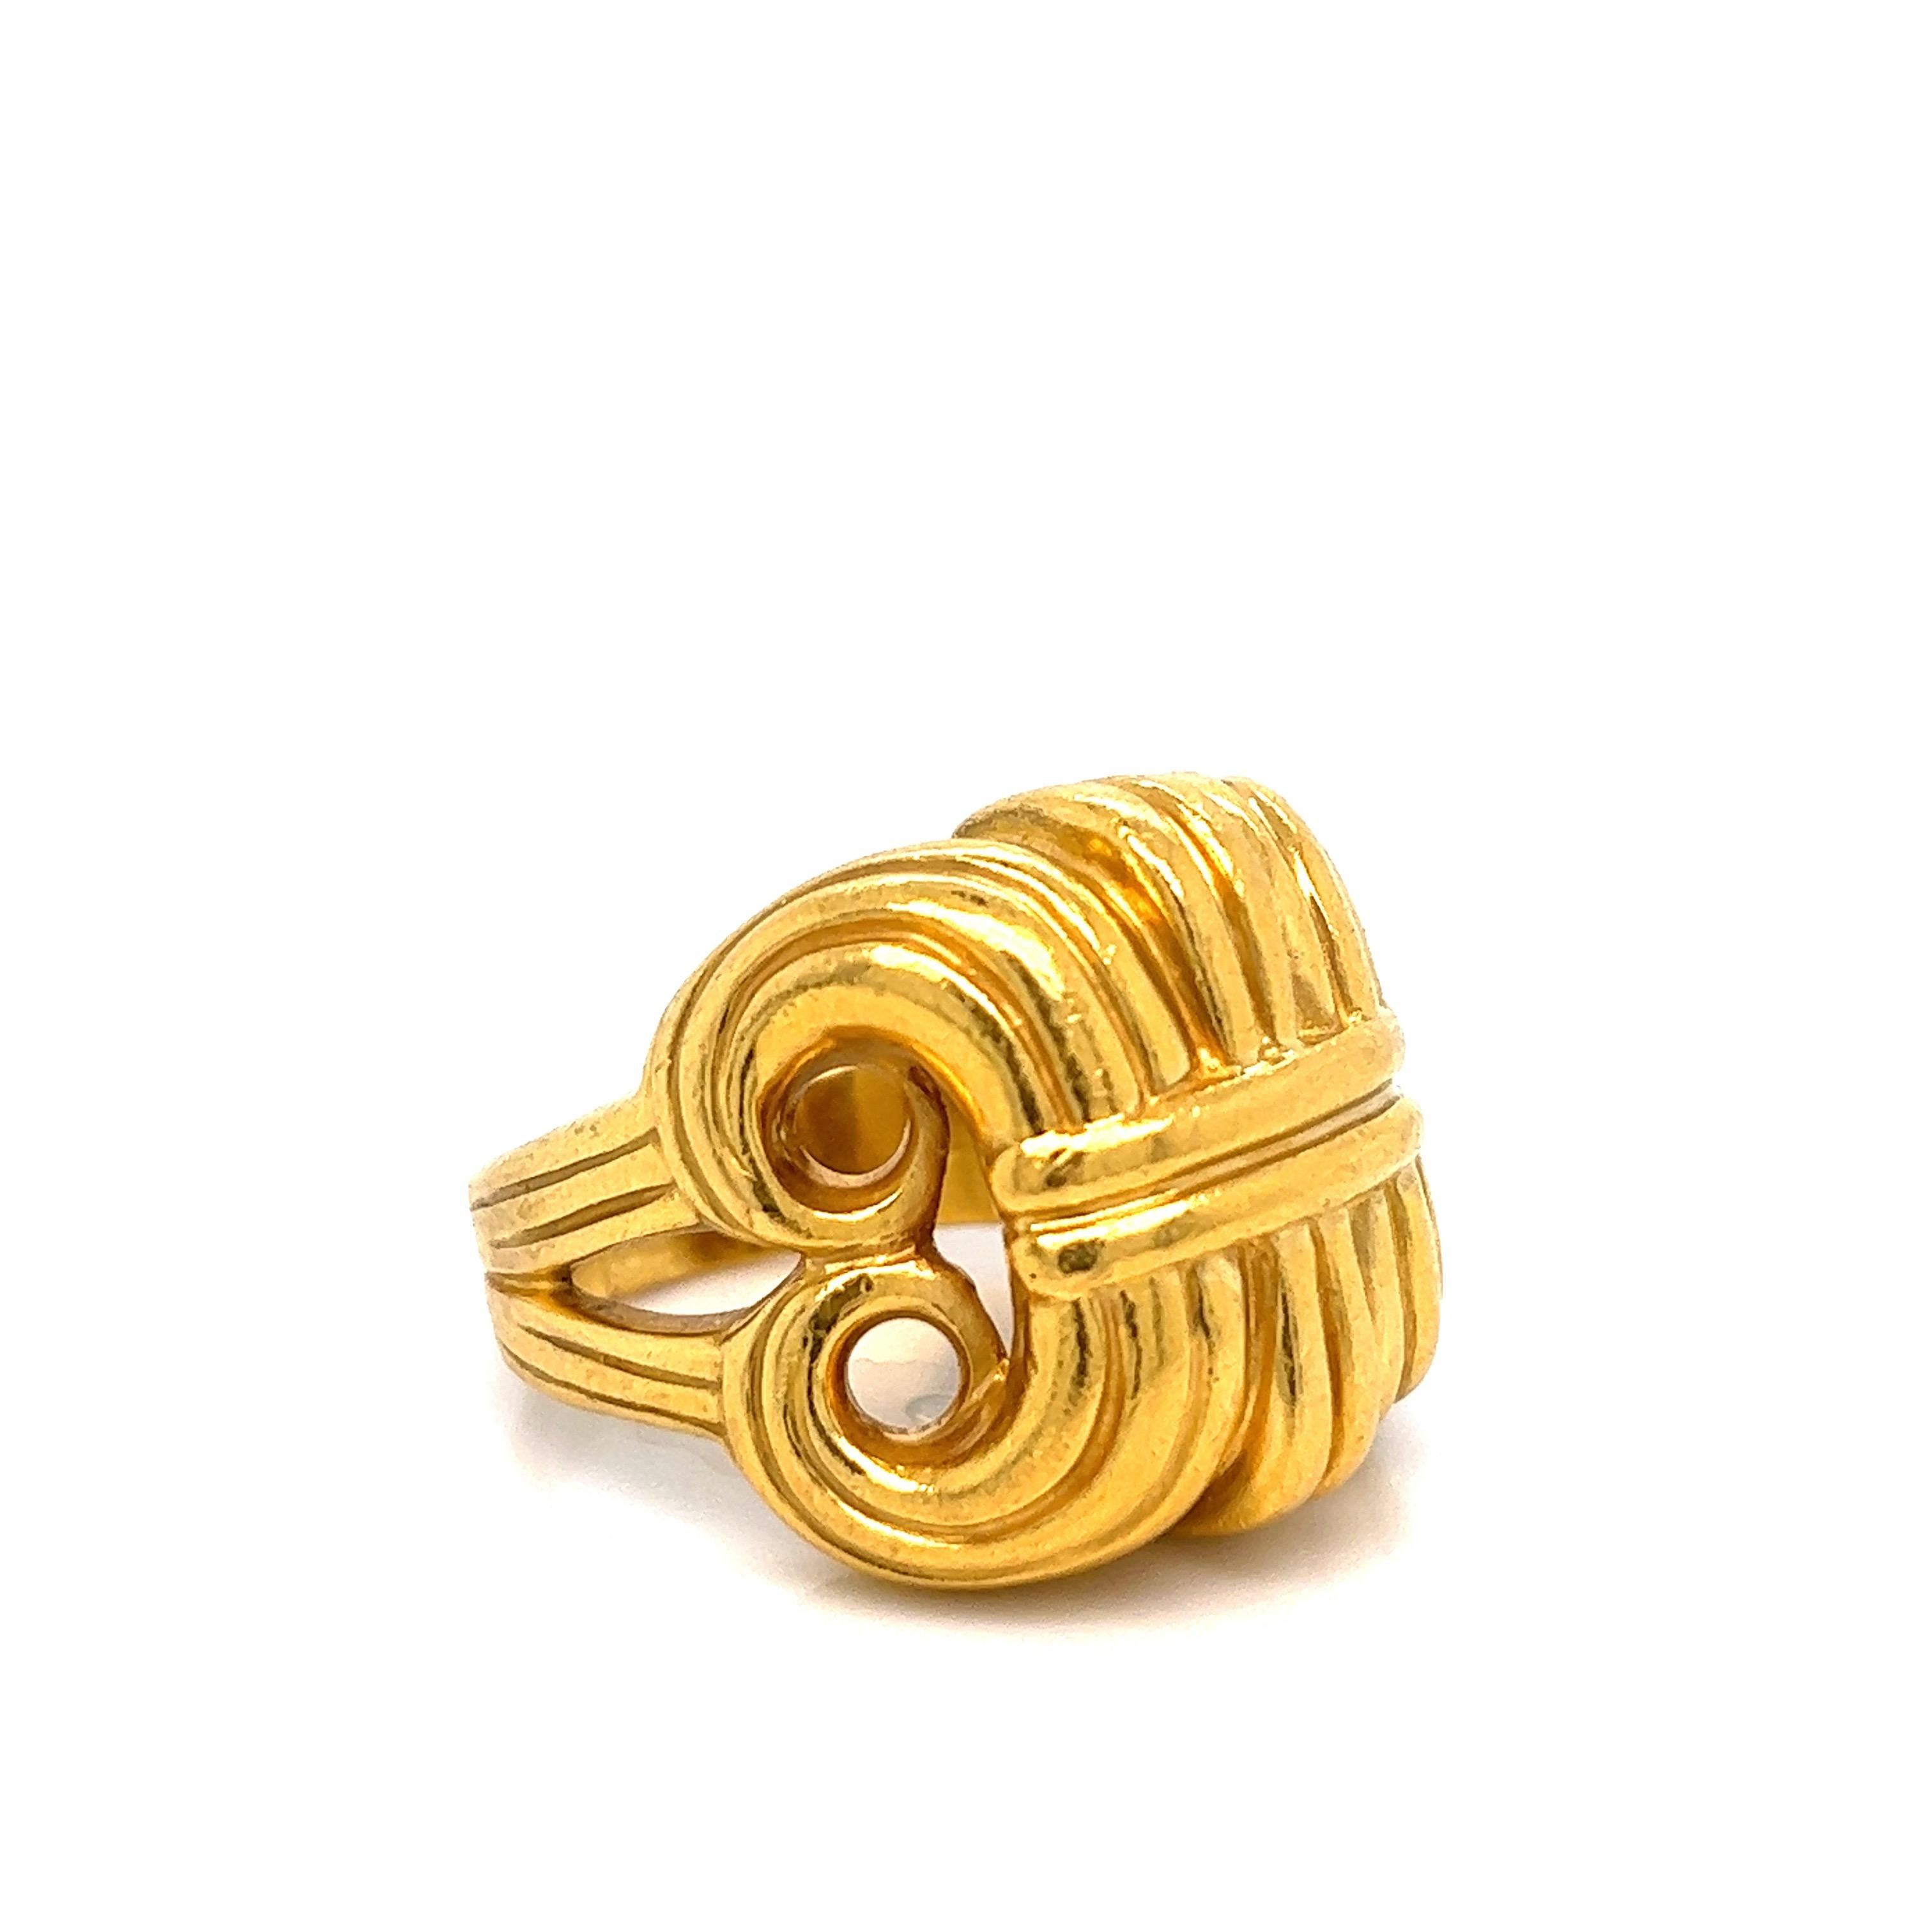 Lagos 22 karat yellow gold ring that features a ram's horn sheath design. The top's measurements are 22.6 mm x 24.2 mm. Size 10.5. Serial no. 26927. Marked: Lagos / 22k / 26927. Total weight: 25.1 grams. 